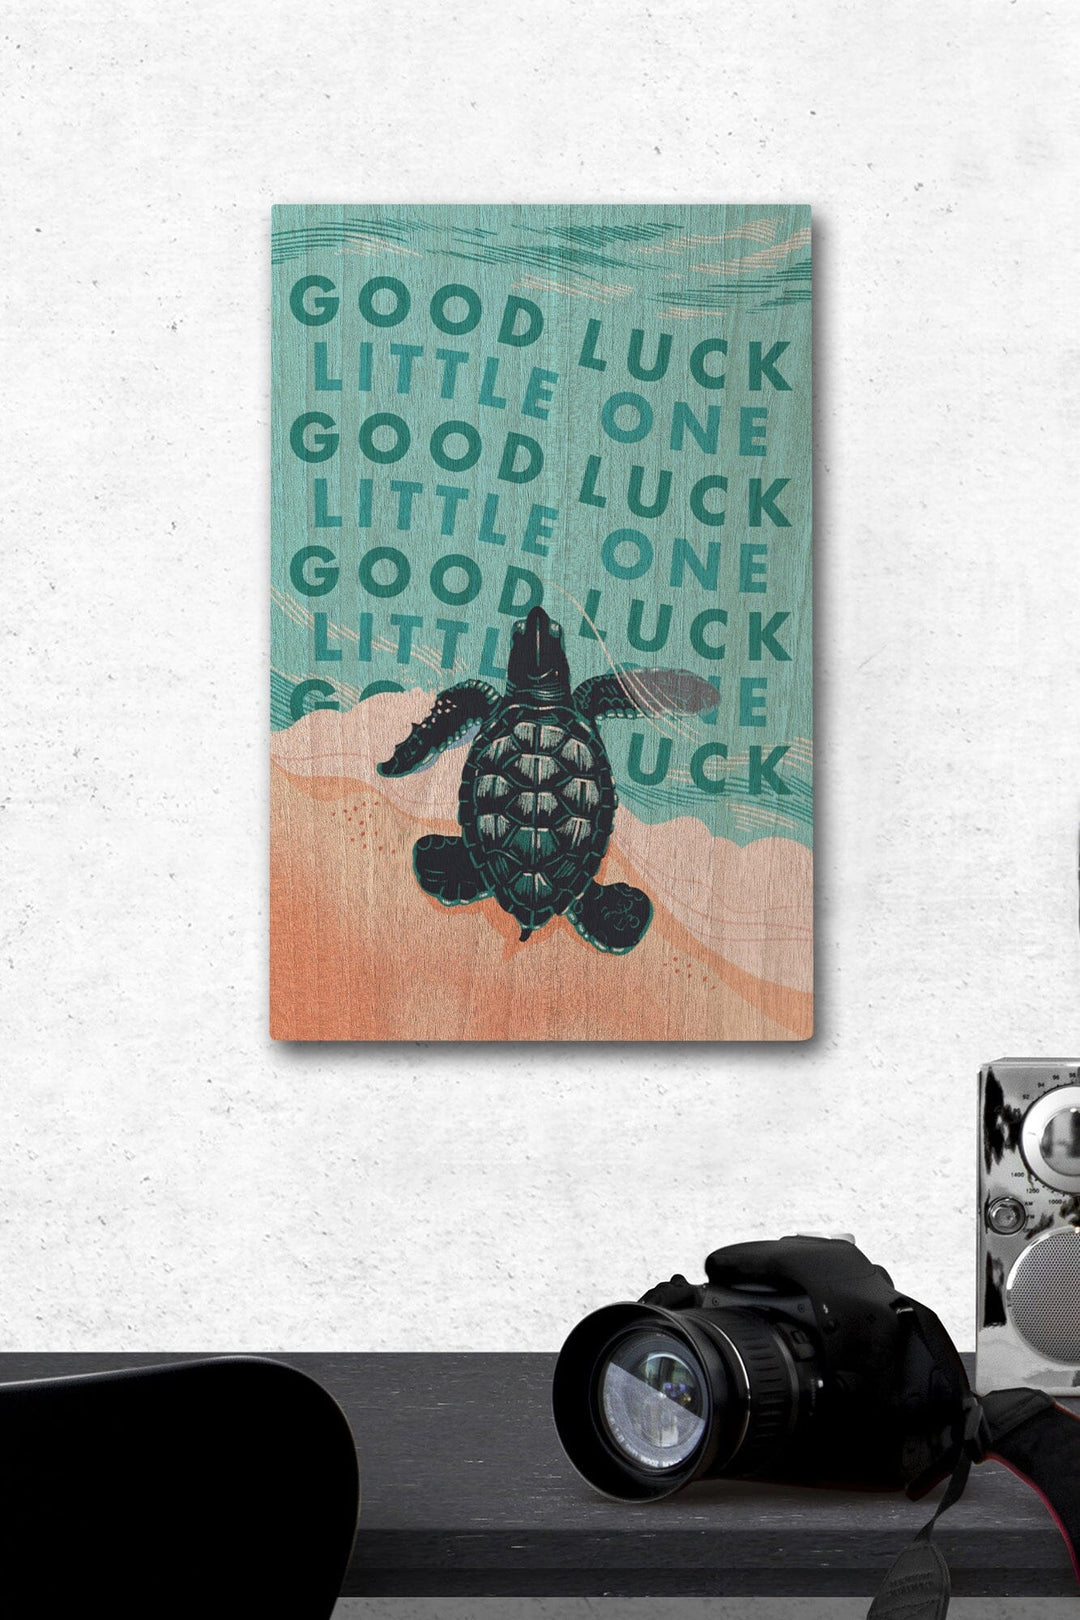 Courageous Explorer Collection, Turtle, Good Luck Little One, Wood Signs and Postcards Wood Lantern Press 12 x 18 Wood Gallery Print 